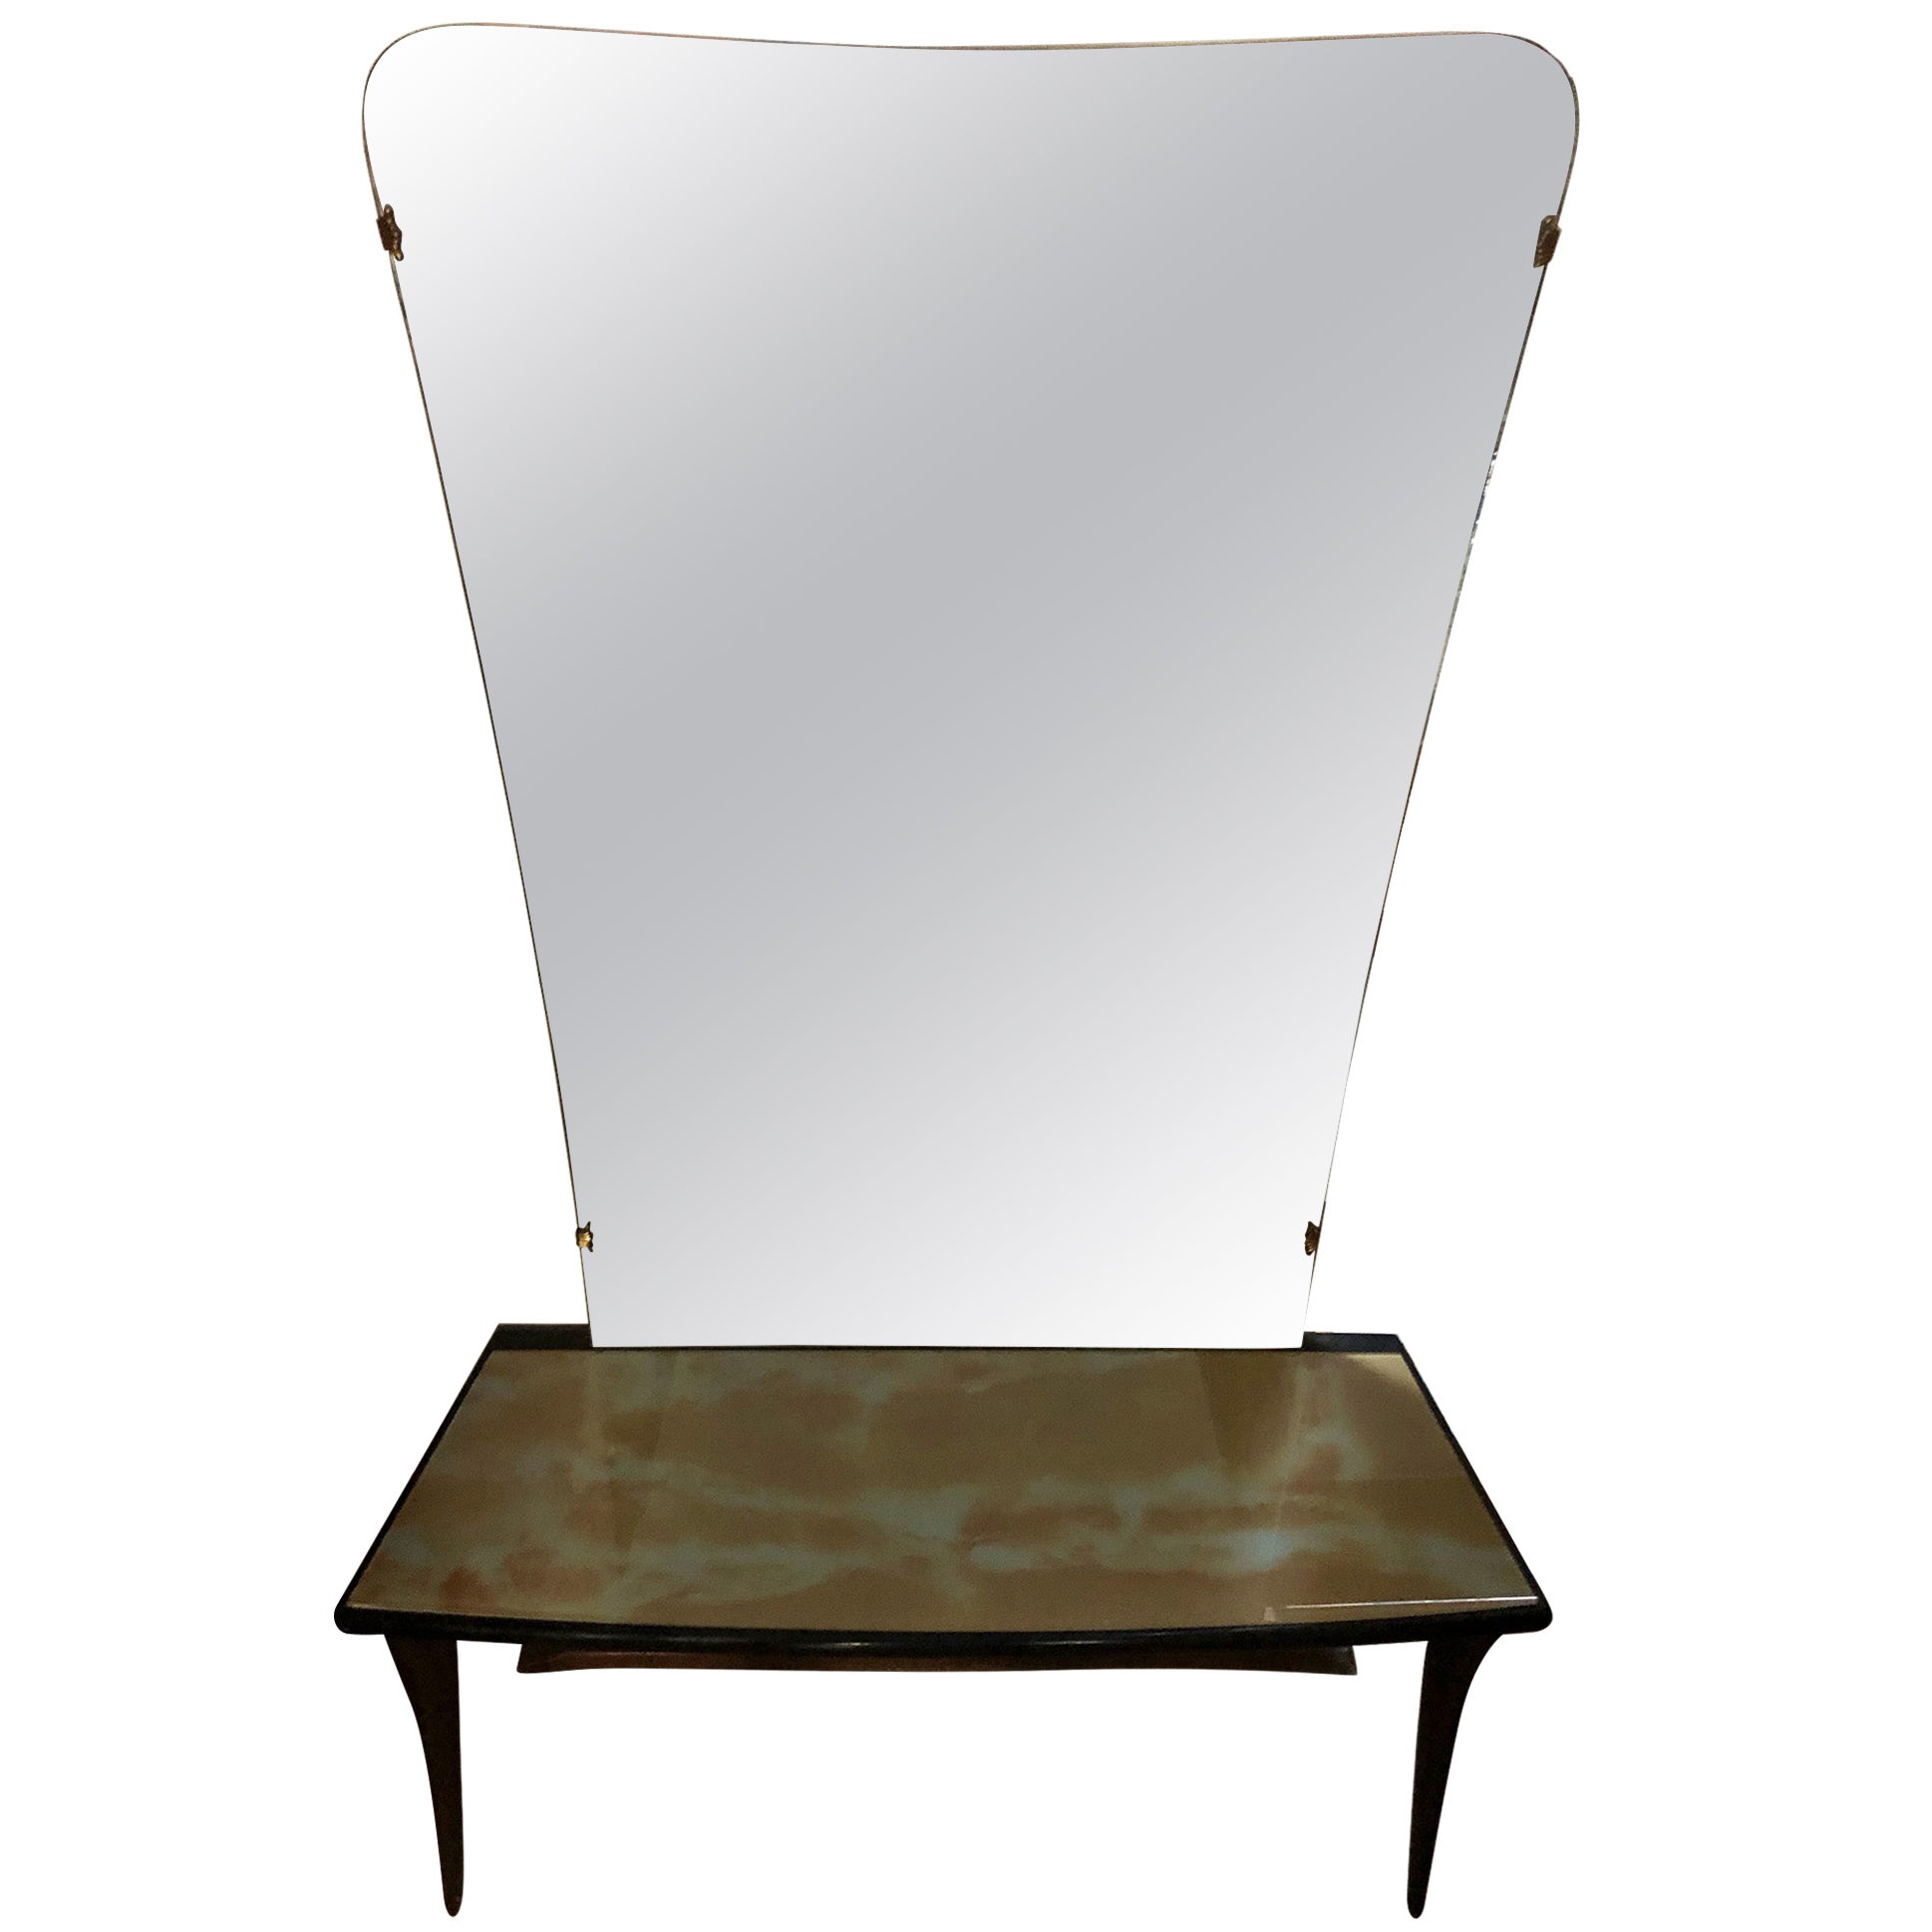 Original Italian Design Console Mirror with Marbled Glass Top